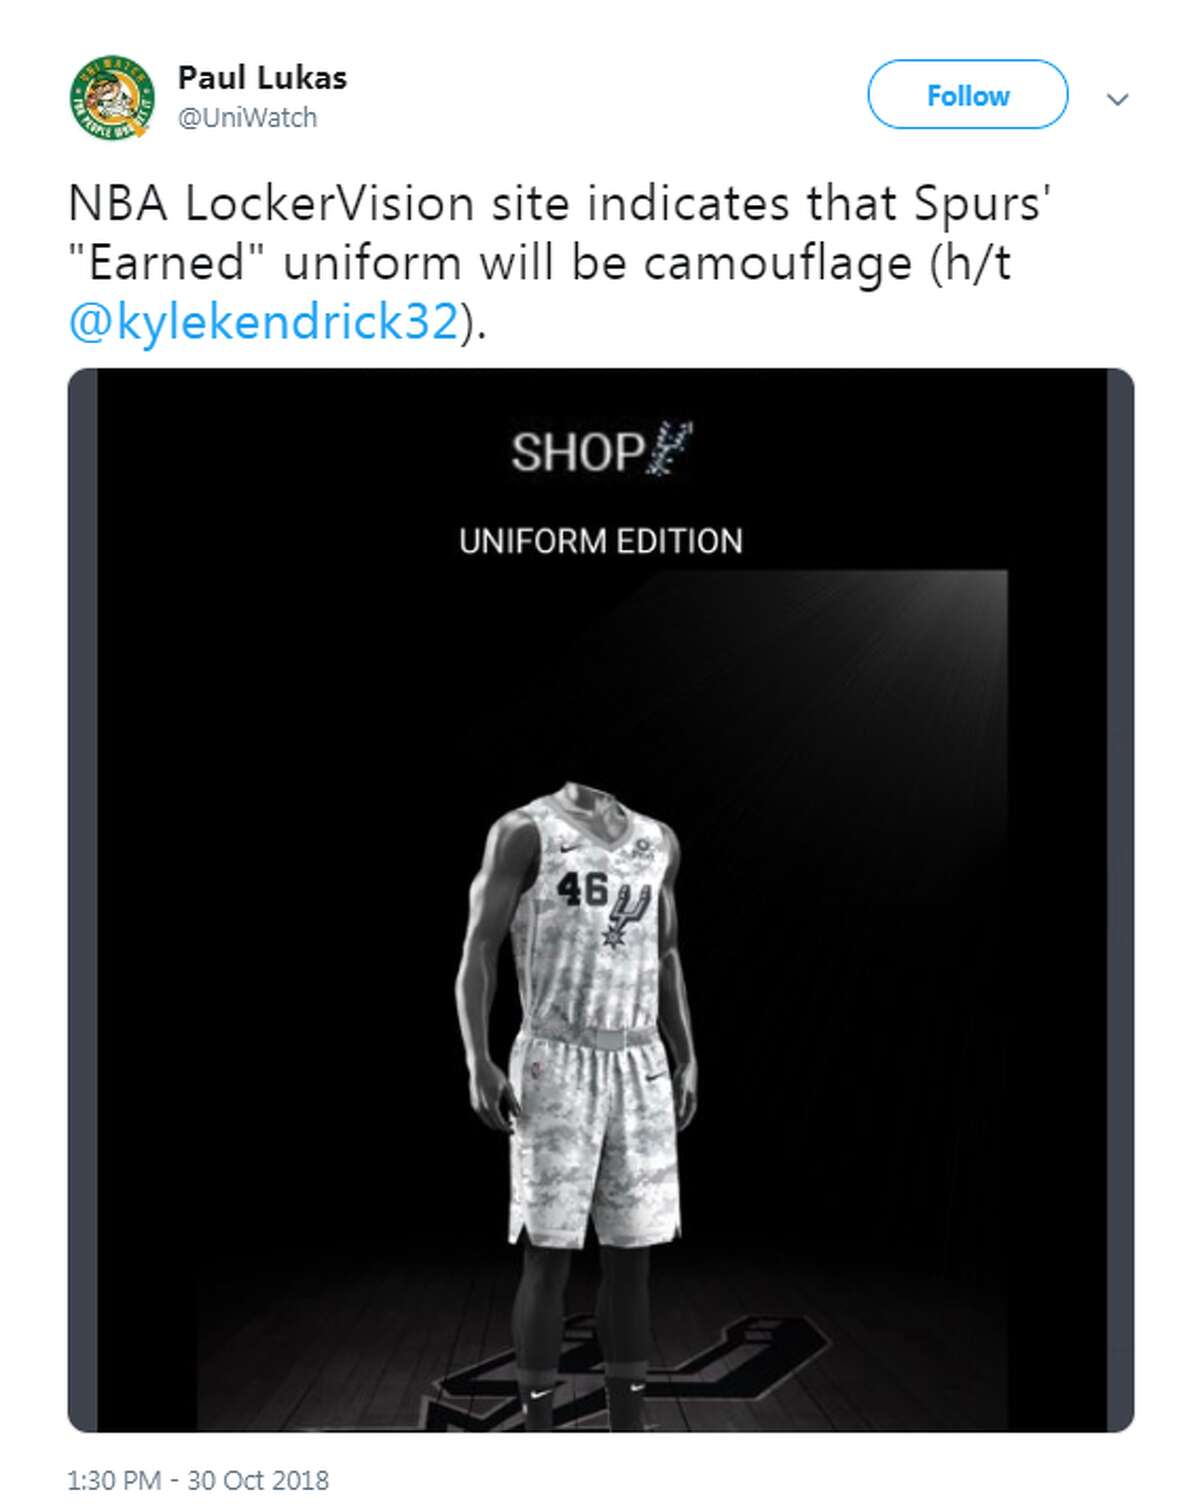 Paul Lukas (@UniWatch): NBA LockerVision site indicates that Spurs' "Earned" uniform will be camouflage (h/t @kylekendrick32).